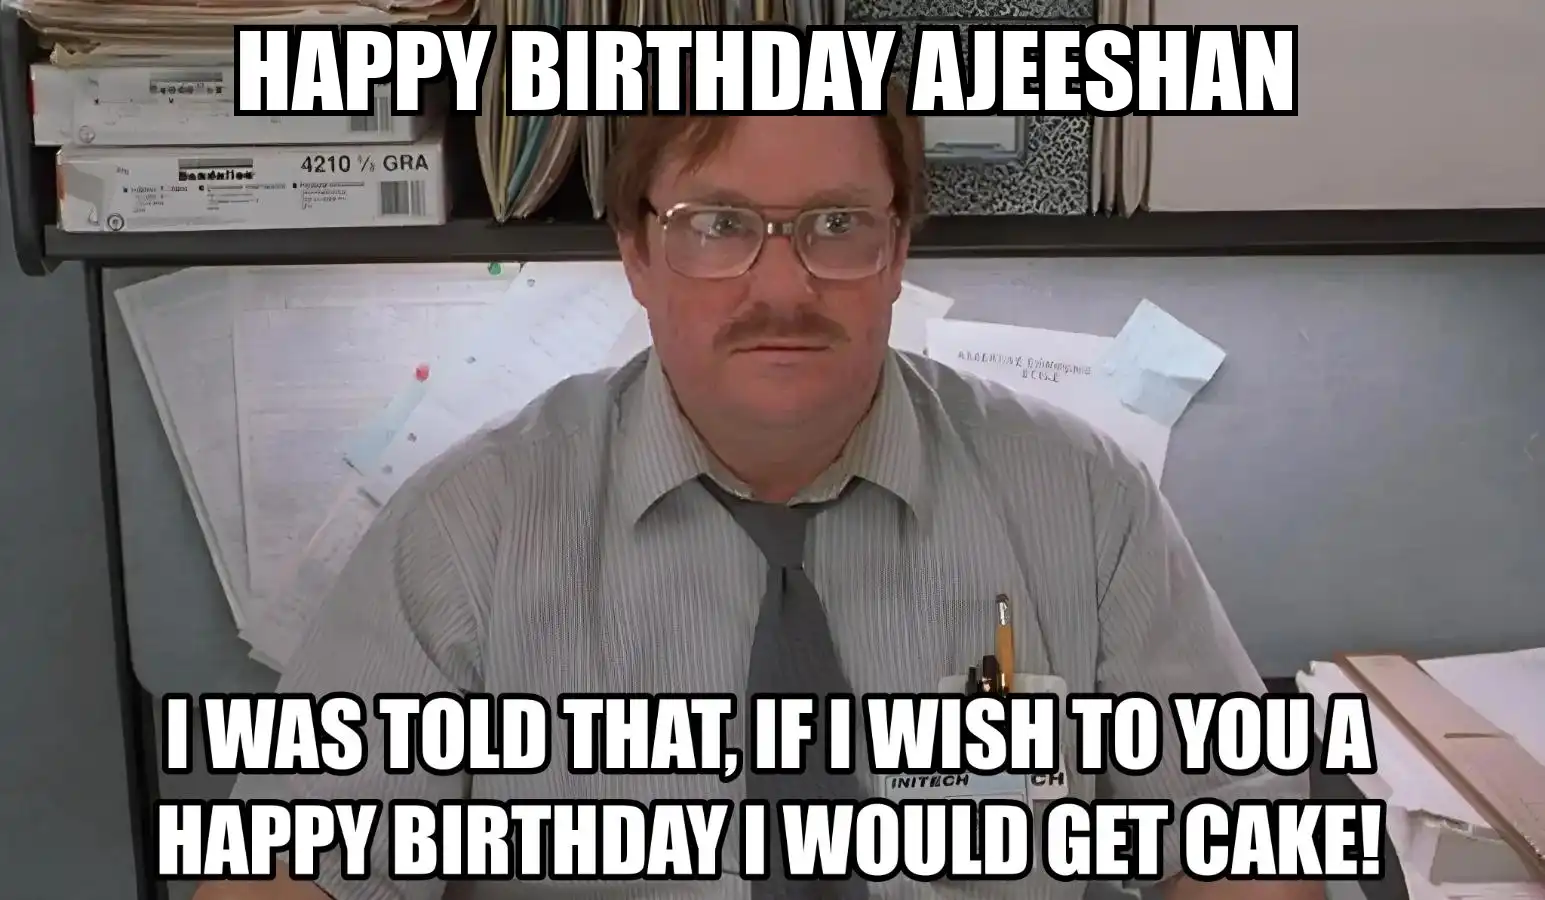 Happy Birthday Ajeeshan I Would Get A Cake Meme